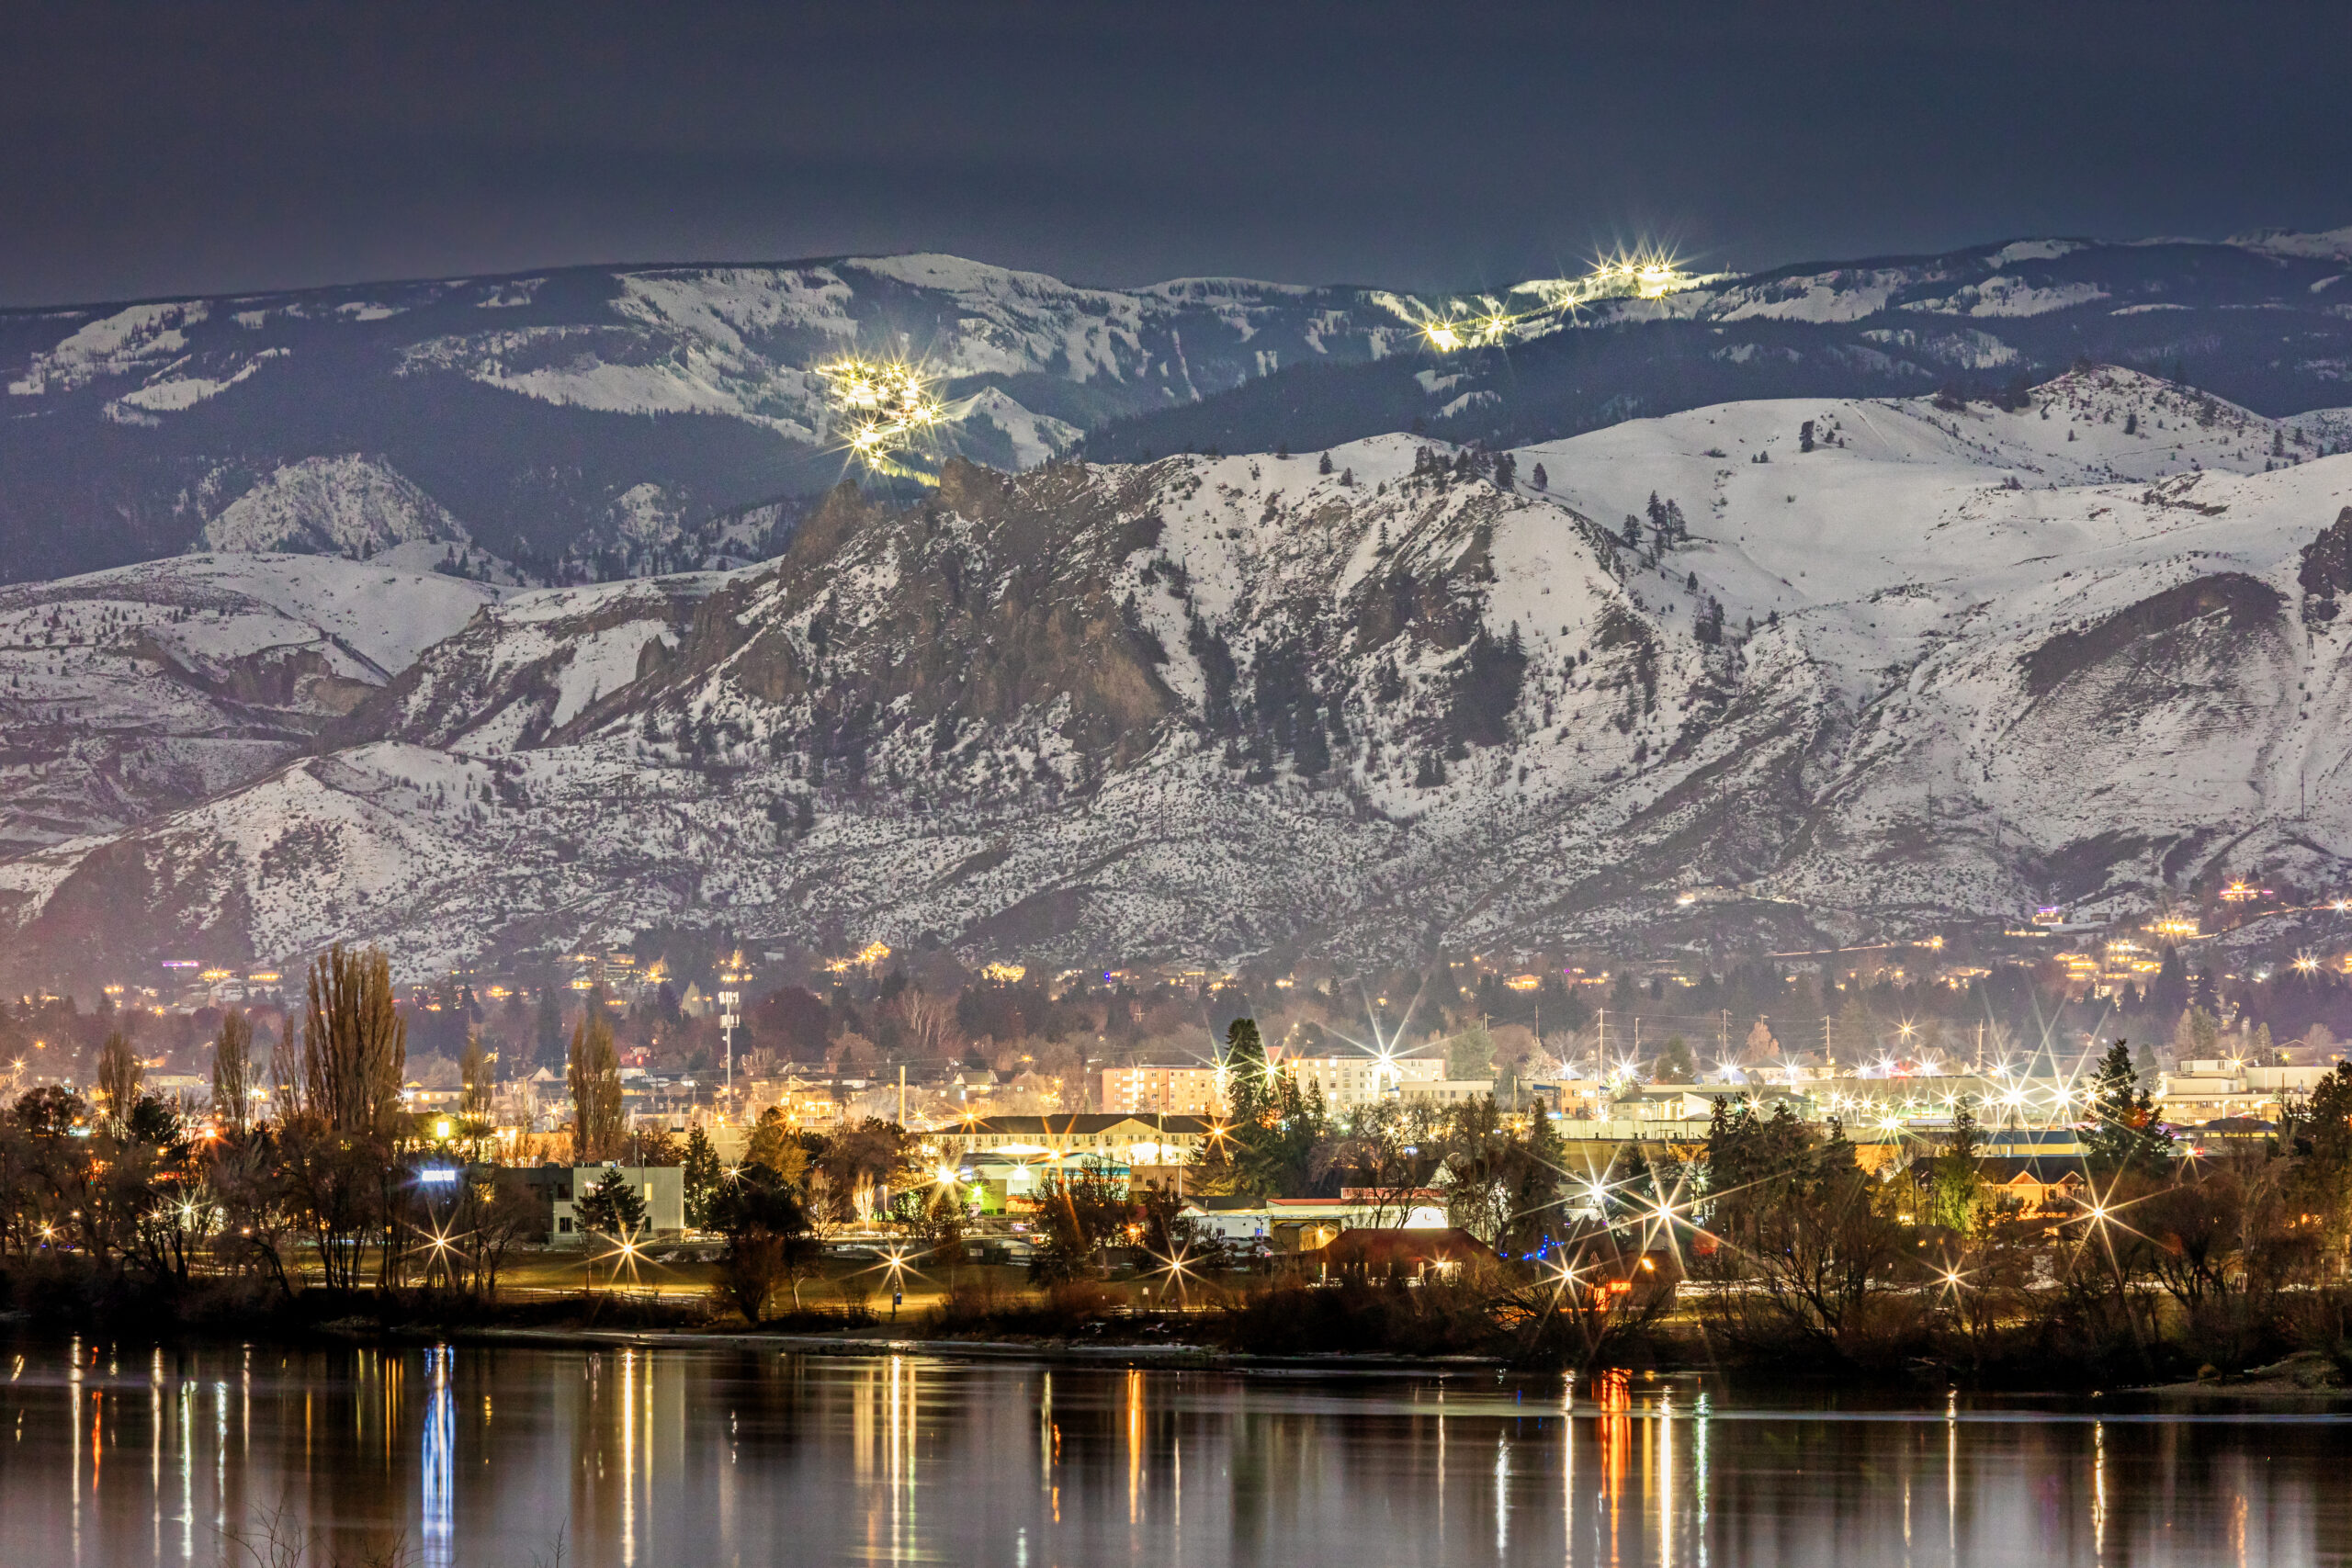 View of Mission Ridge and Wenatchee at night covered in snow from across the Columbia River.